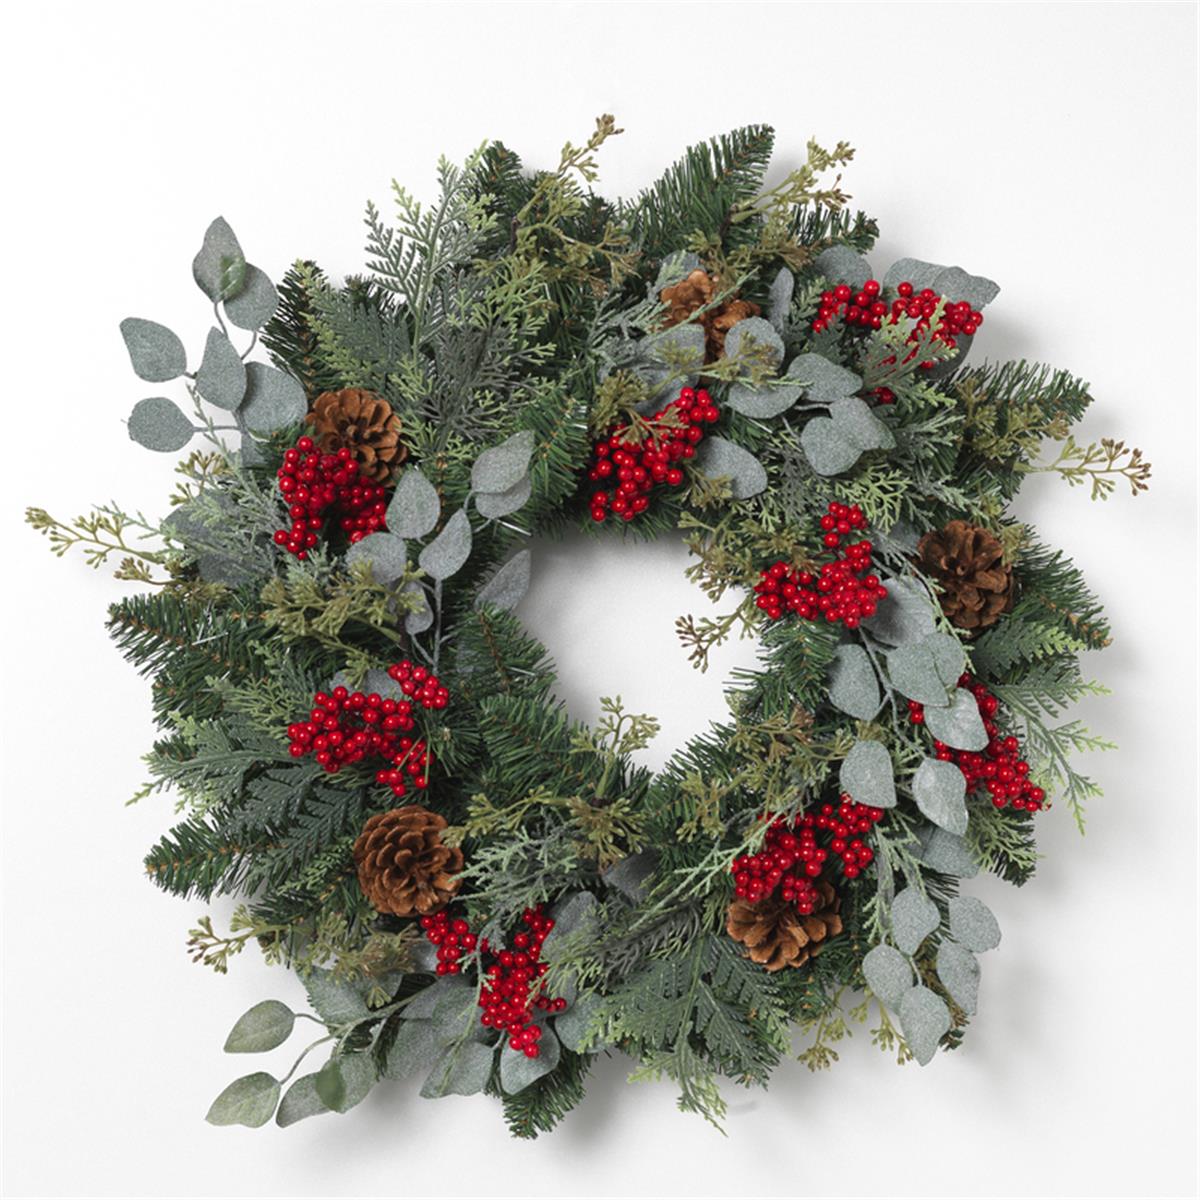 Picture of Gerson 9070196 24 in. Decorated Wreath